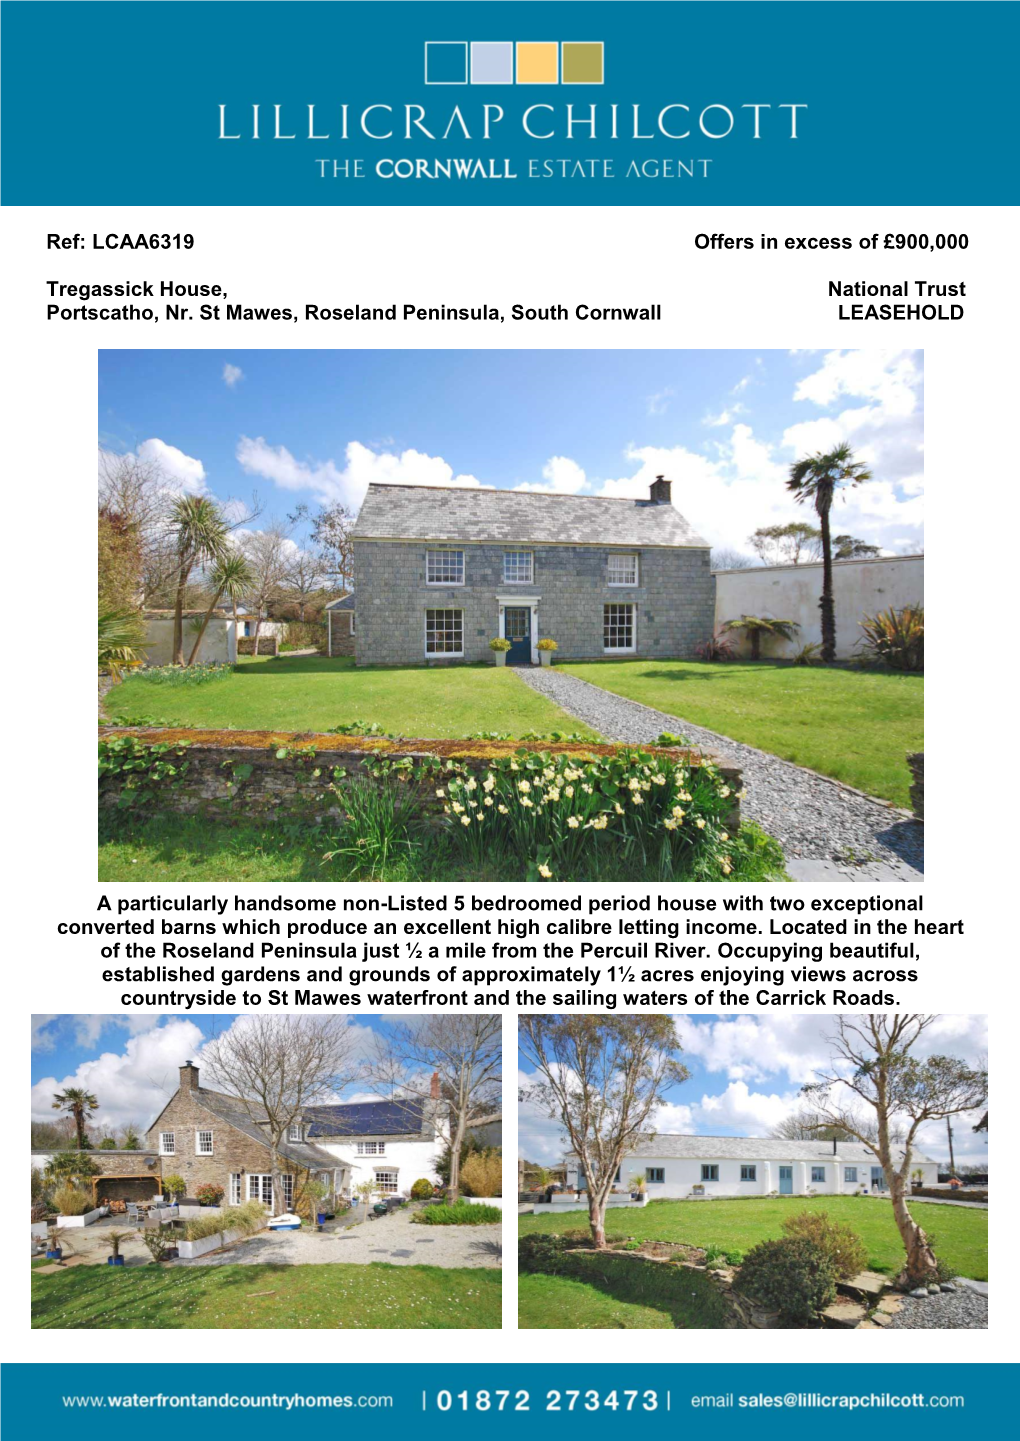 Ref: LCAA6319 Offers in Excess of £900,000